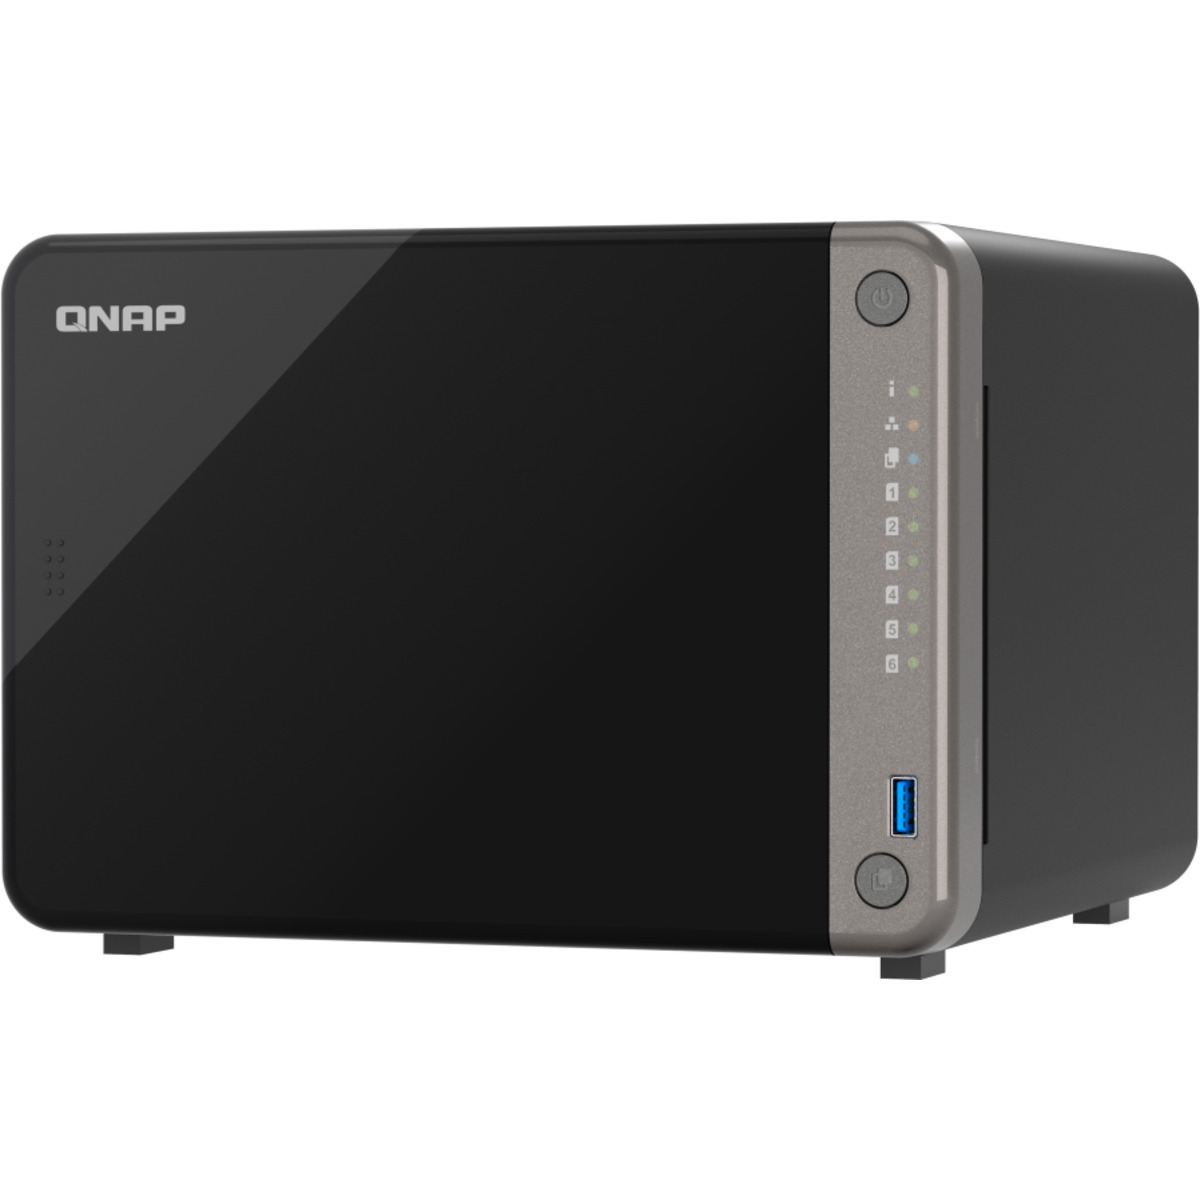 QNAP TS-AI642 4tb 6-Bay Desktop Multimedia / Power User / Business NAS - Network Attached Storage Device 4x1tb Sandisk Ultra 3D SDSSDH3-1T00 2.5 560/520MB/s SATA 6Gb/s SSD CONSUMER Class Drives Installed - Burn-In Tested TS-AI642